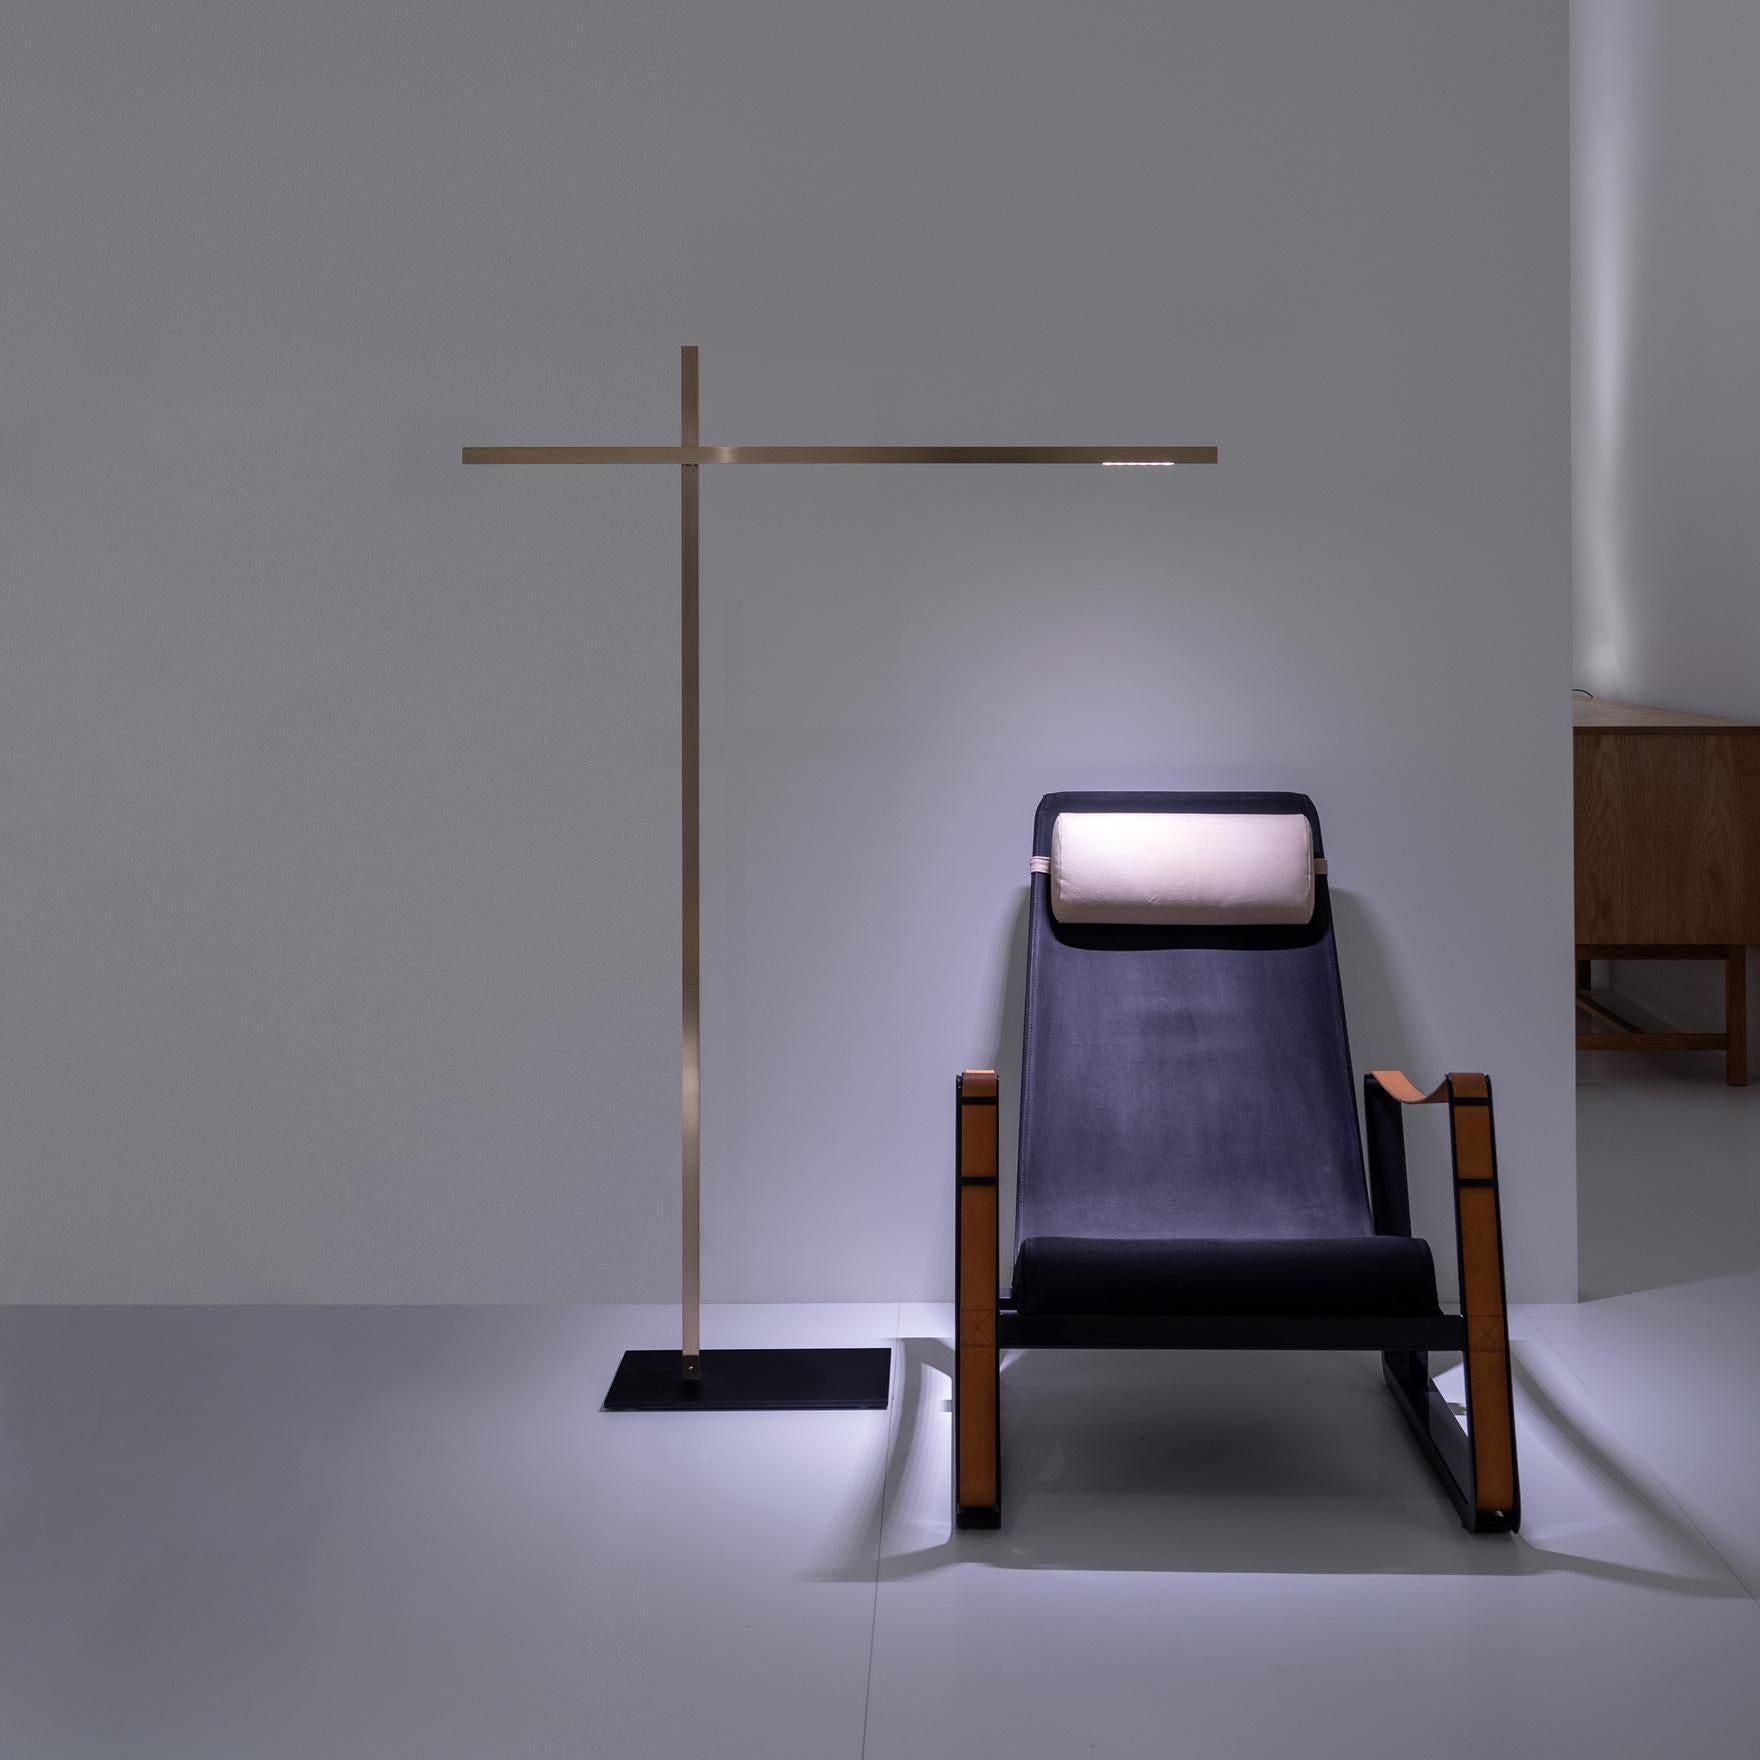 A floor lamp conceived to provide direct light in a simple and flexible manner.
Its principle component is the pivot point between two “chopsticks” (Hashi)
that serve as light sources which, positioned in different ways, create a strong, graphic